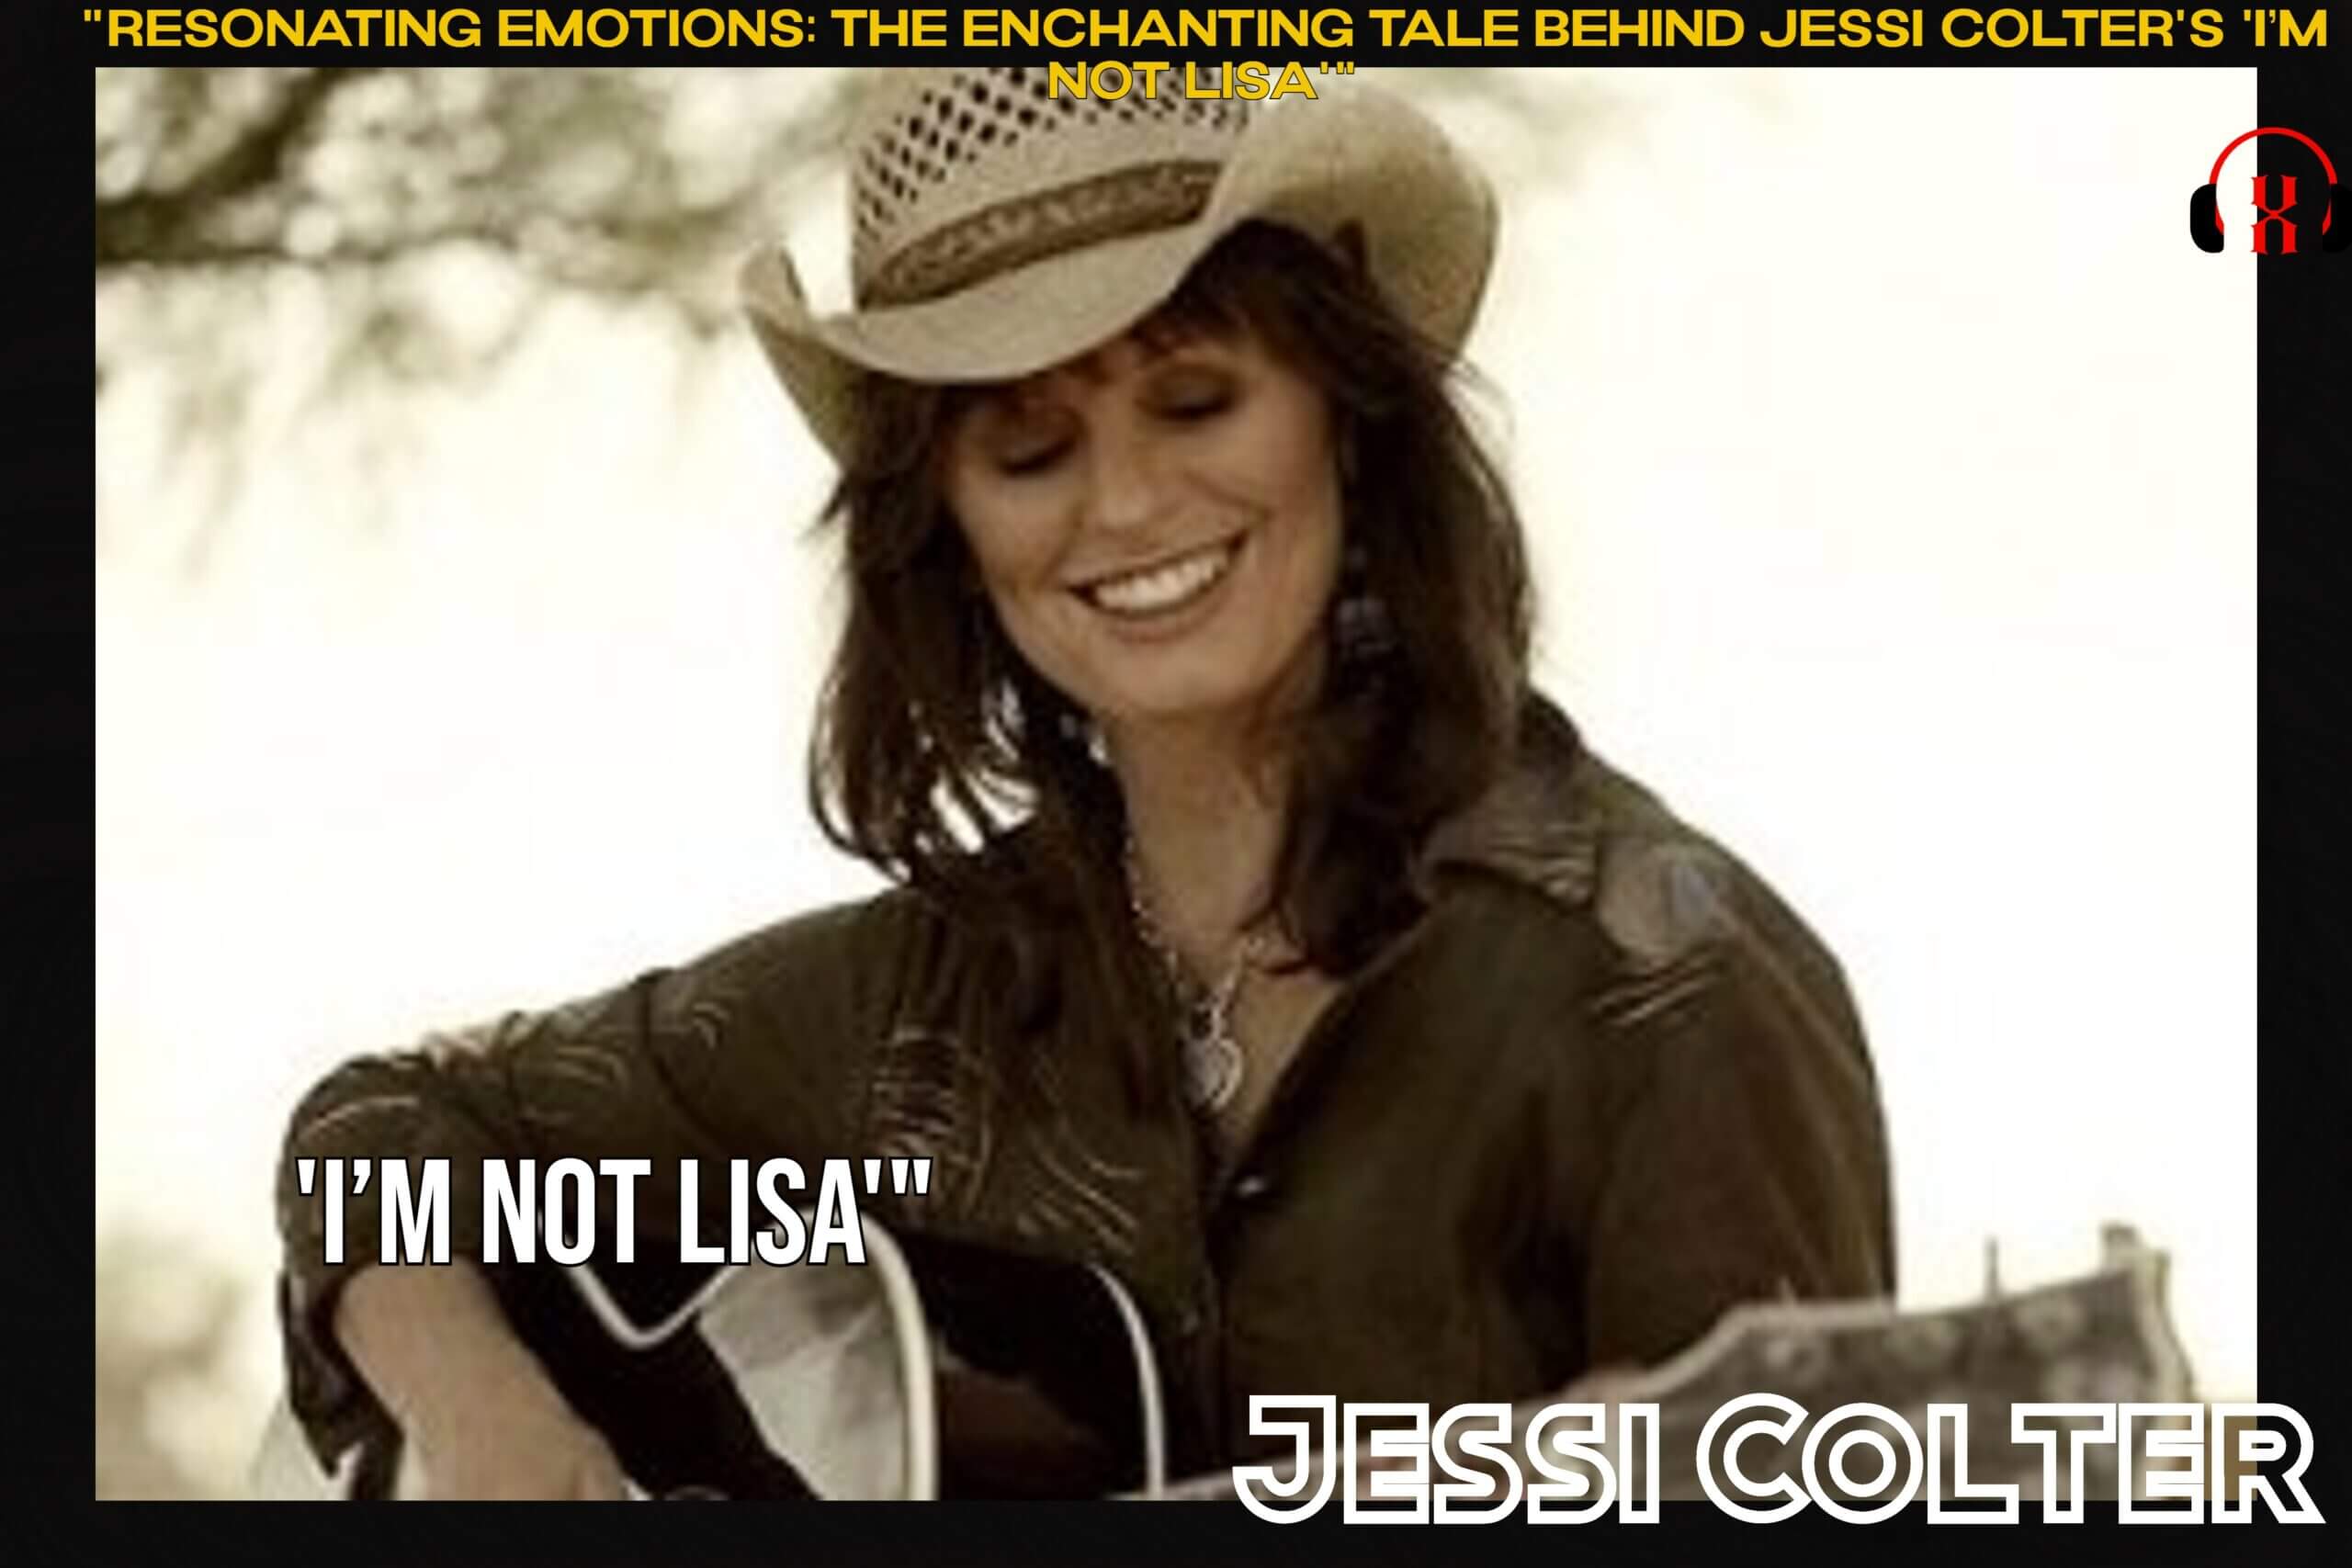 “Resonating Emotions: The Enchanting Tale Behind Jessi Colter’s ‘I’m Not Lisa'”